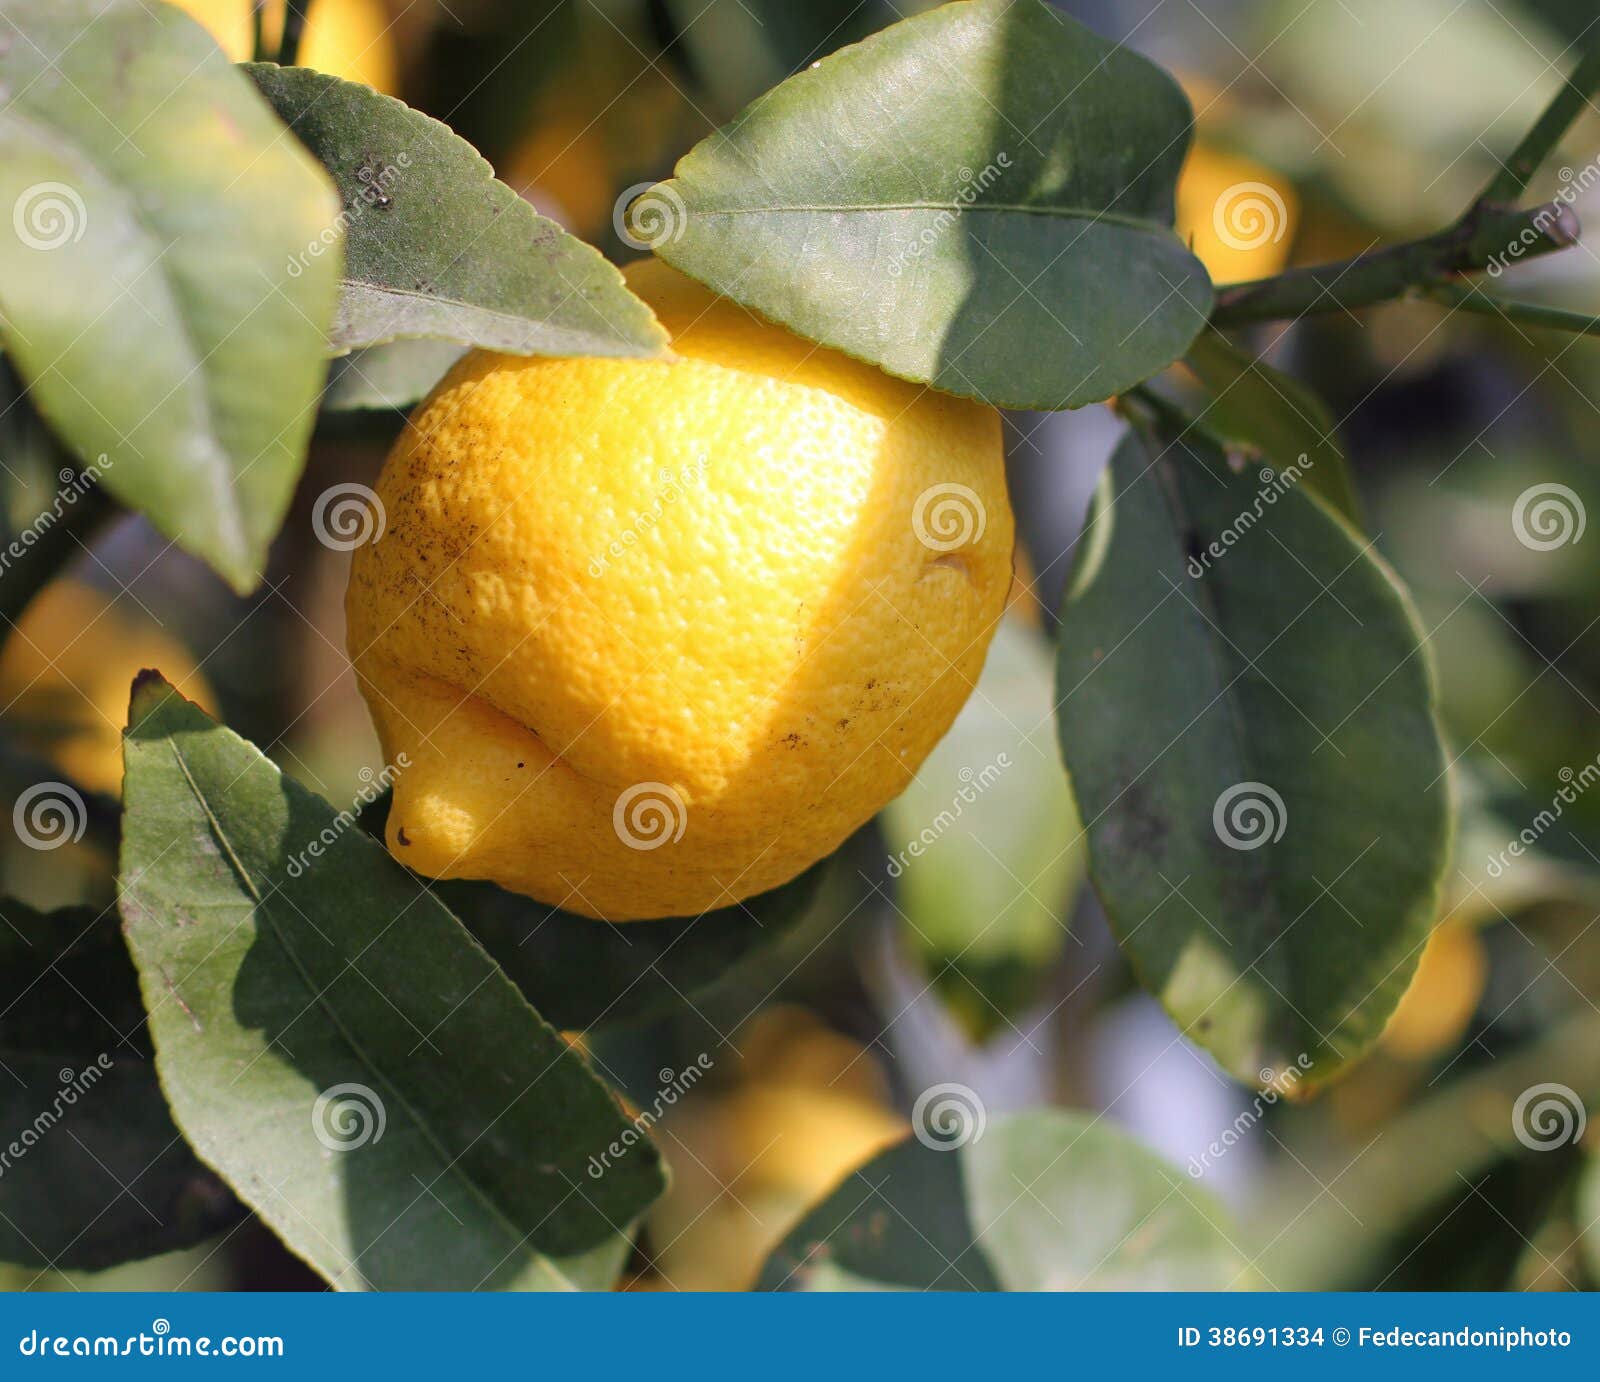 lemon from sicily hanging from a tree